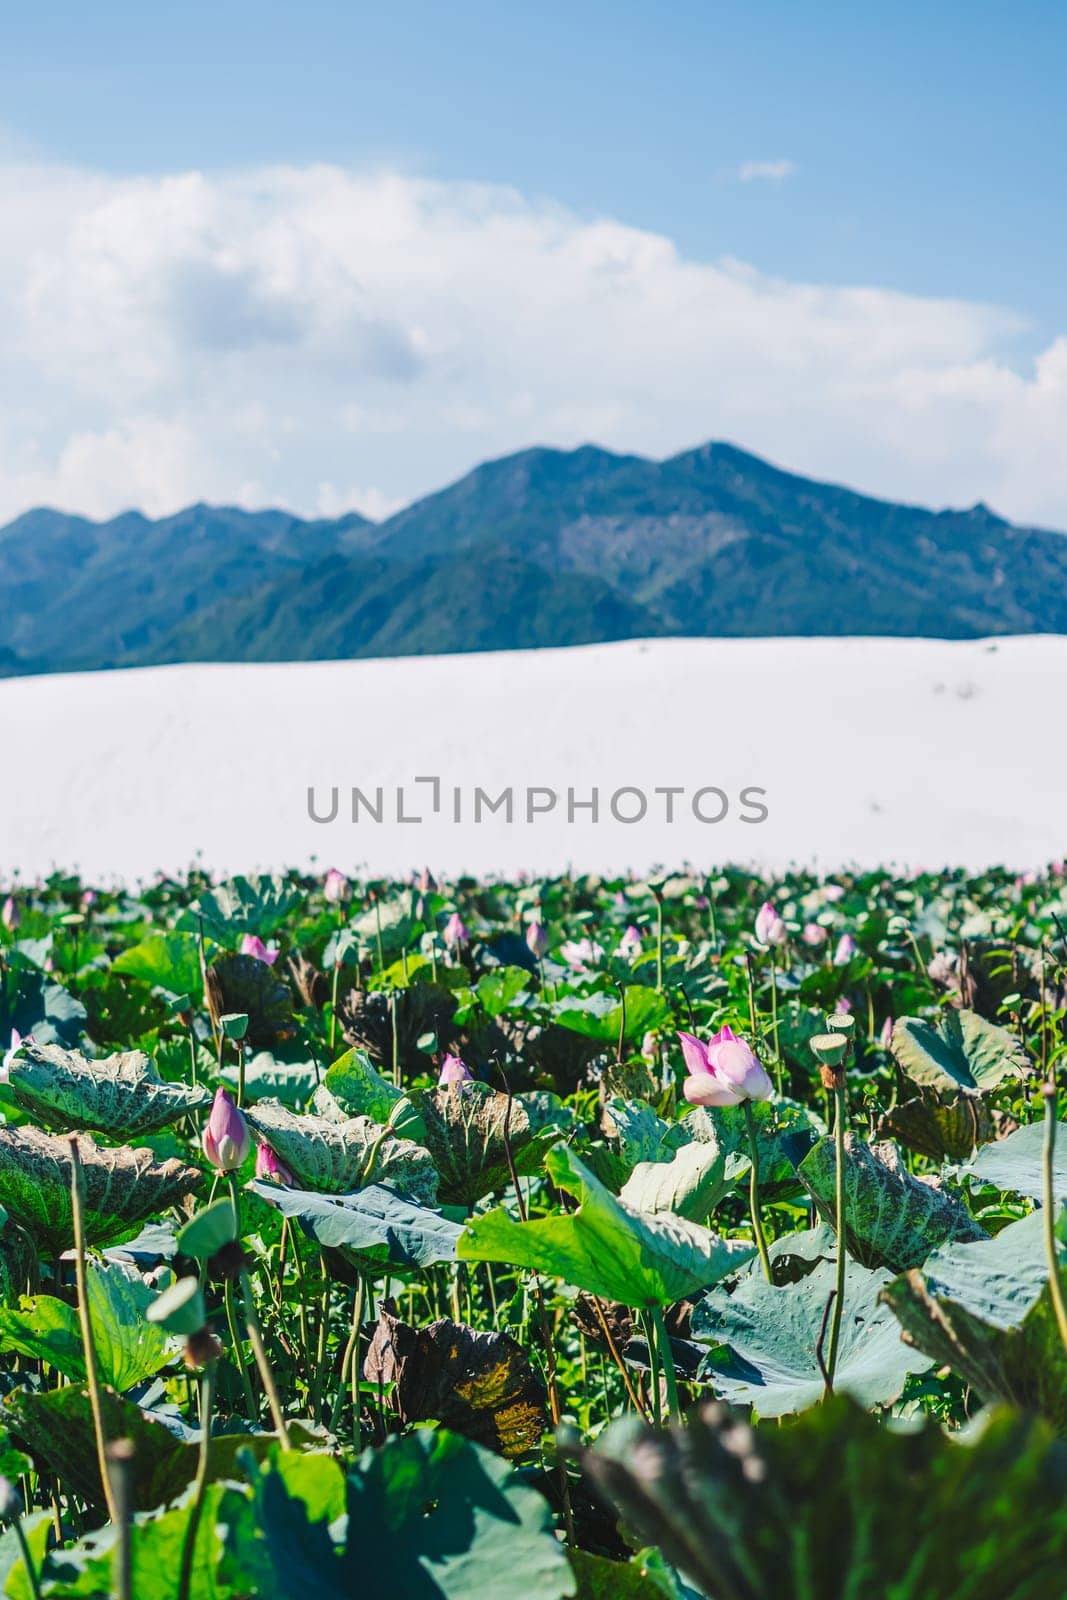 A field of lotus flowers in front of a mountain.